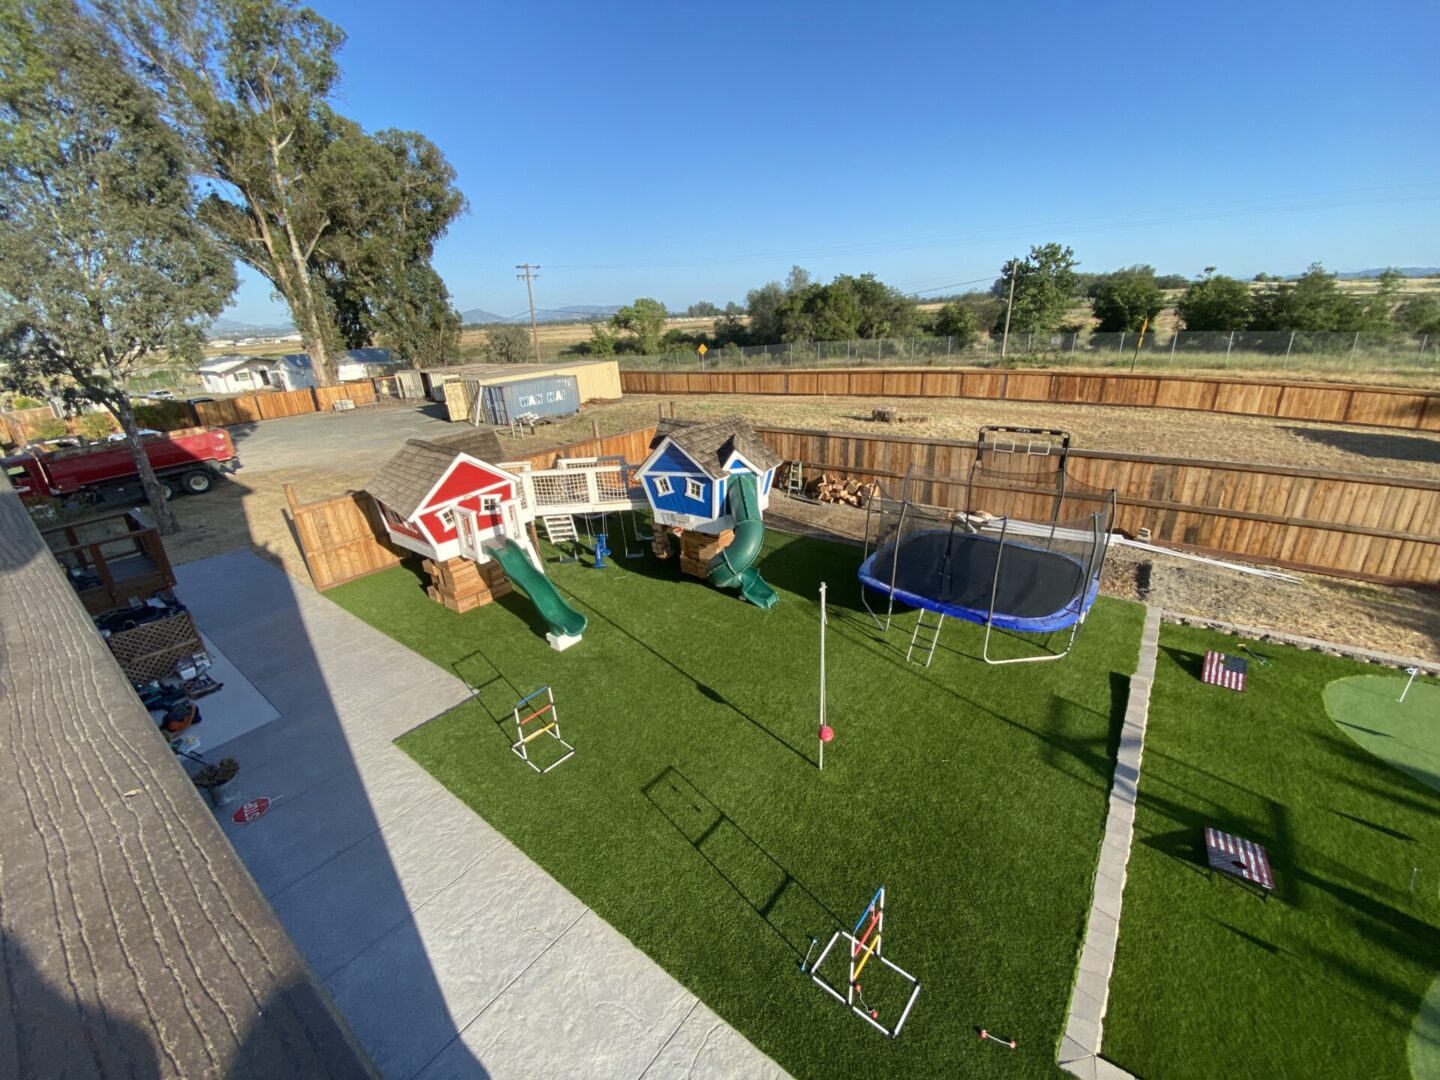 Artificial grass, kids’ playground set, landscaping by Guys Yard Design in Sonoma, CA